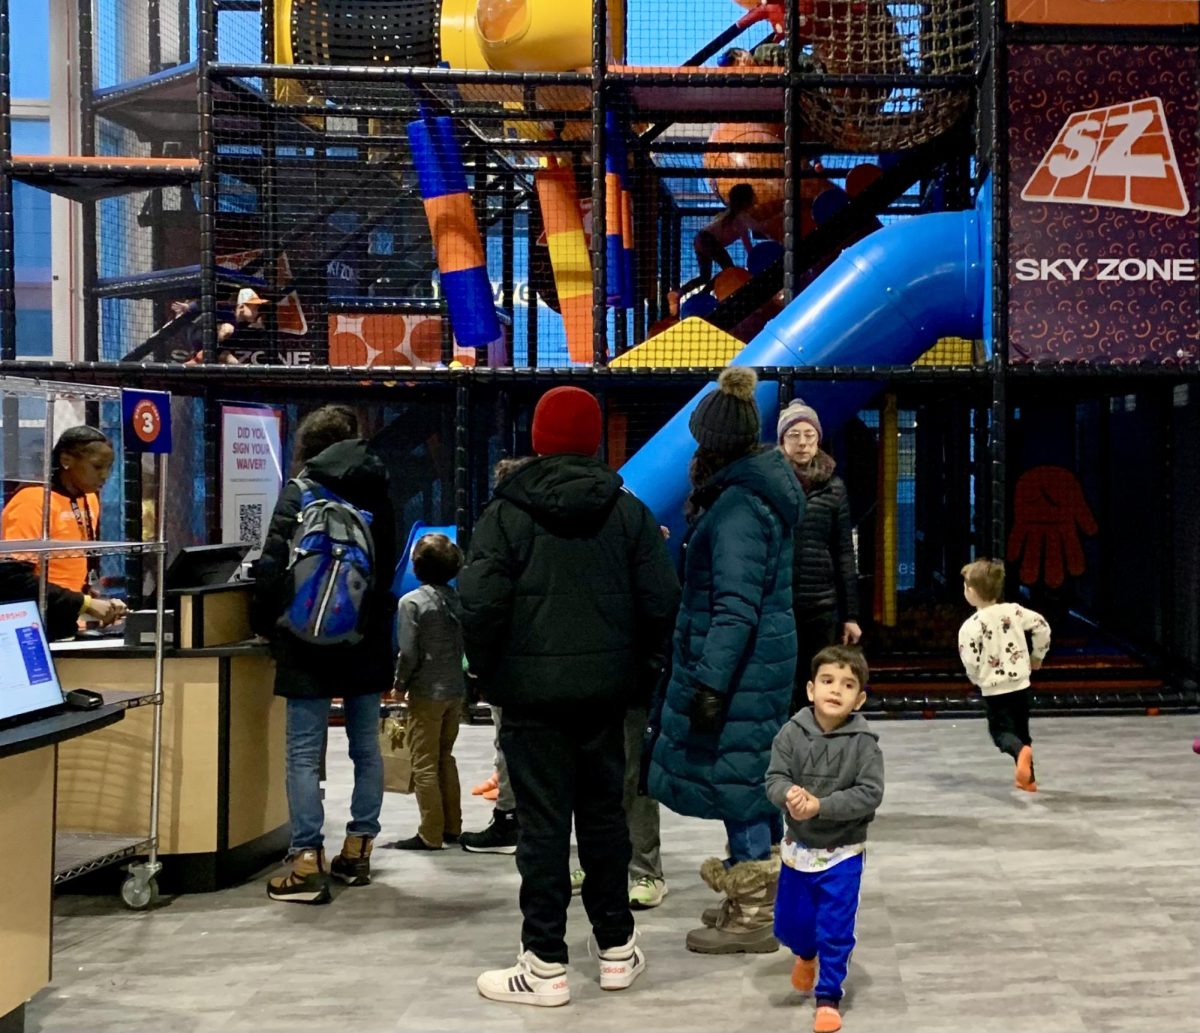 Parents with young children wait to buy tickets, with the multi-leveled tubular playground behind.